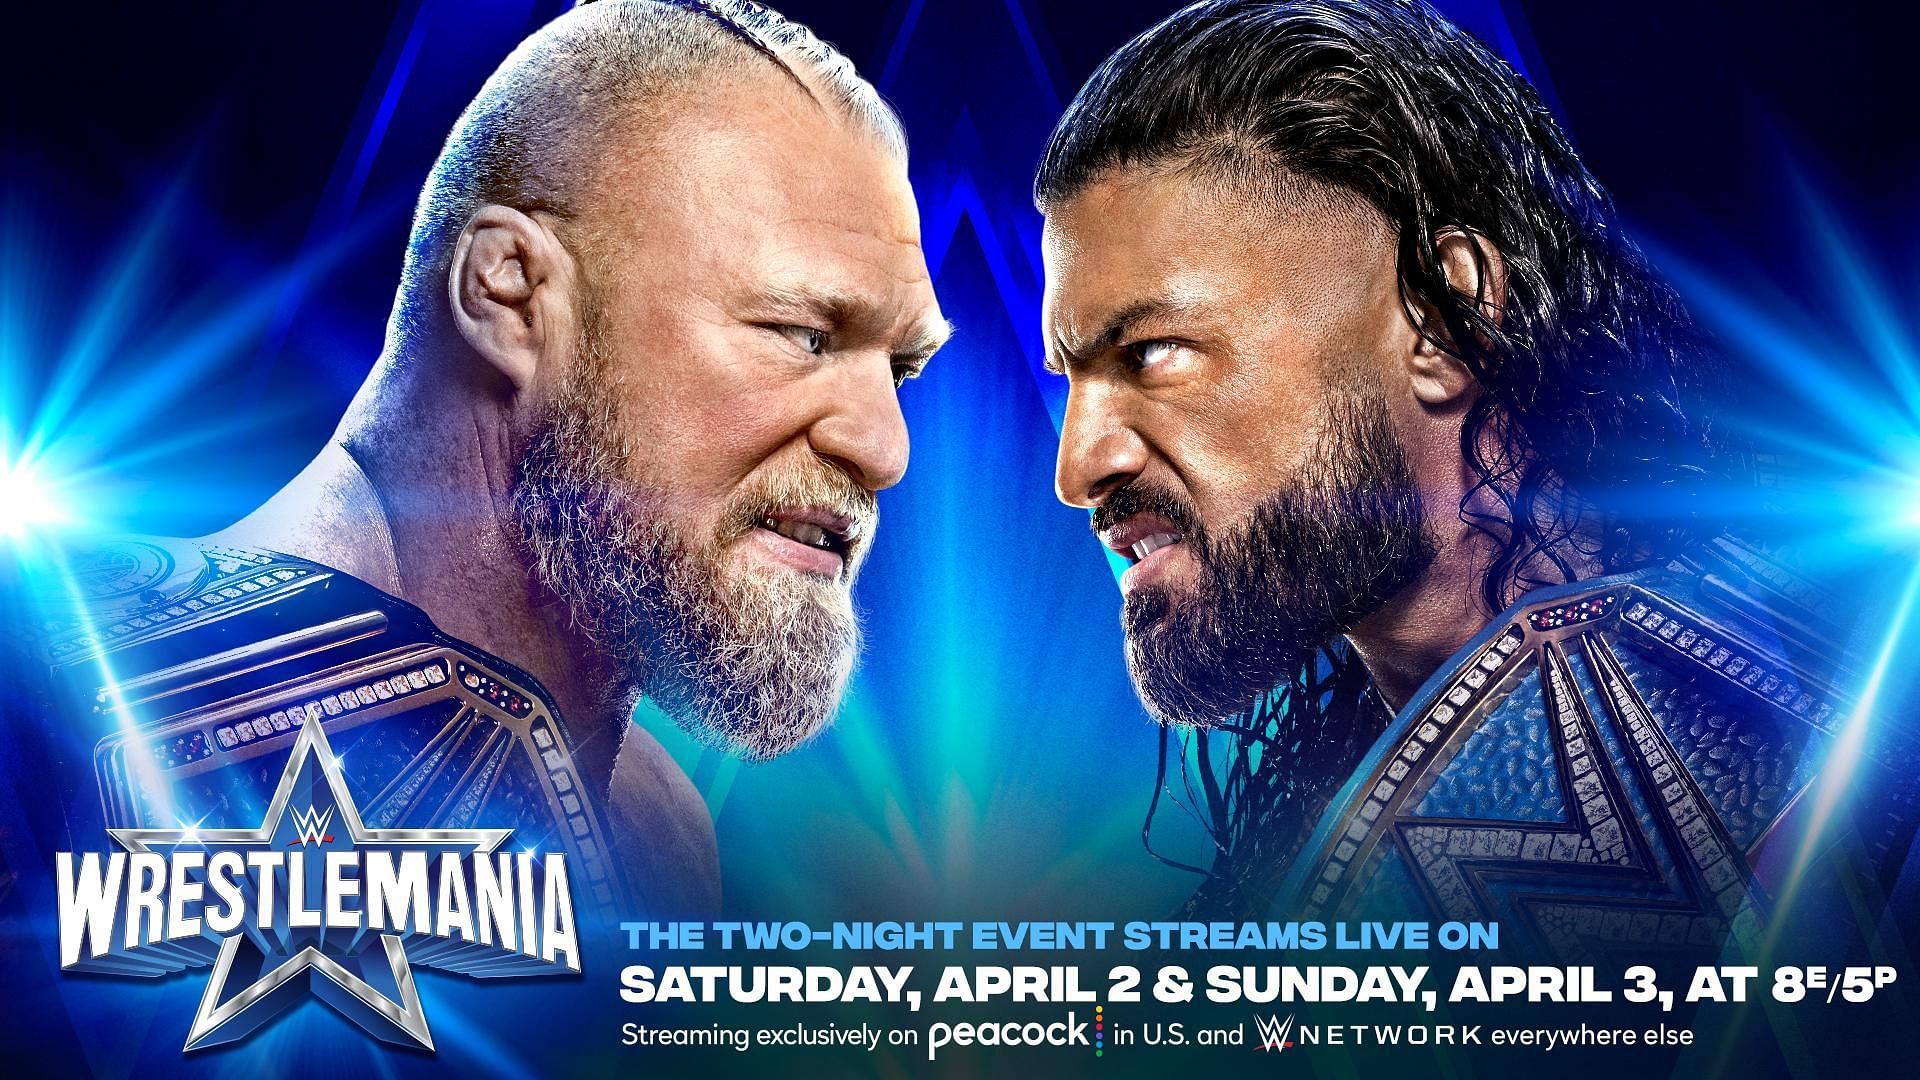 A Winner Take All match is set for WrestleMania 38